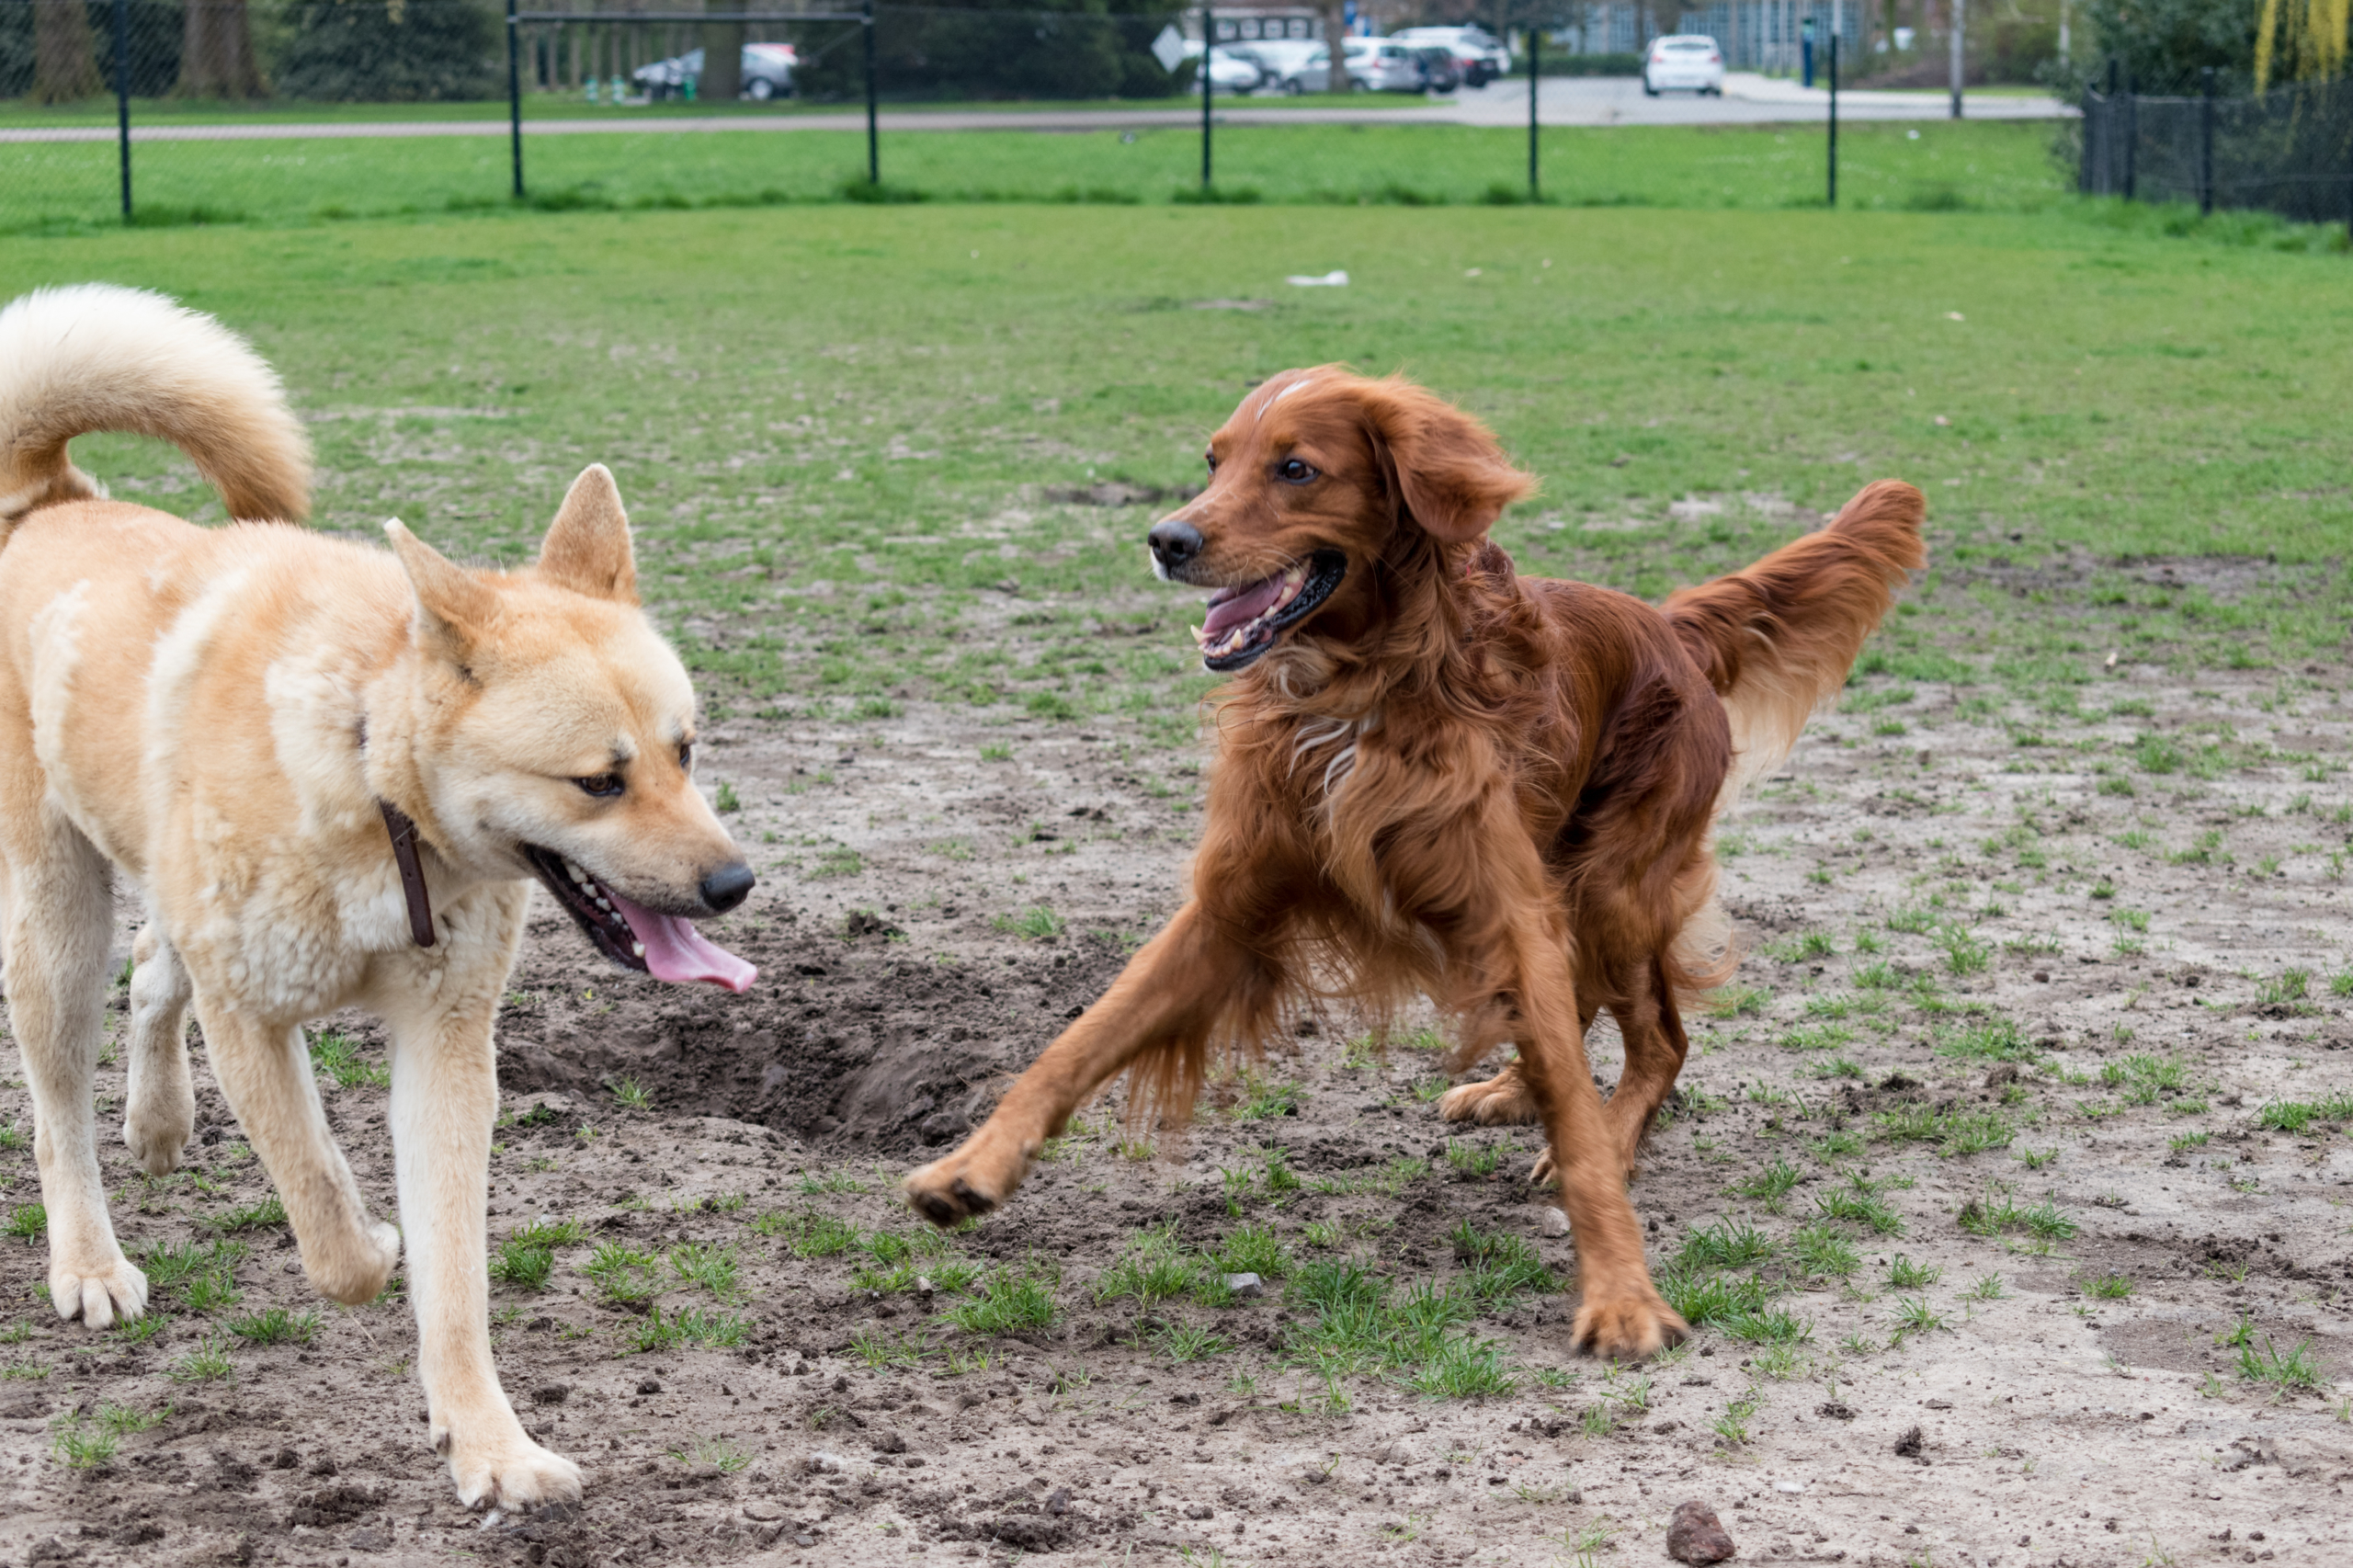 two dogs playing in a field, one dog with tongue hanging out and the other prancing